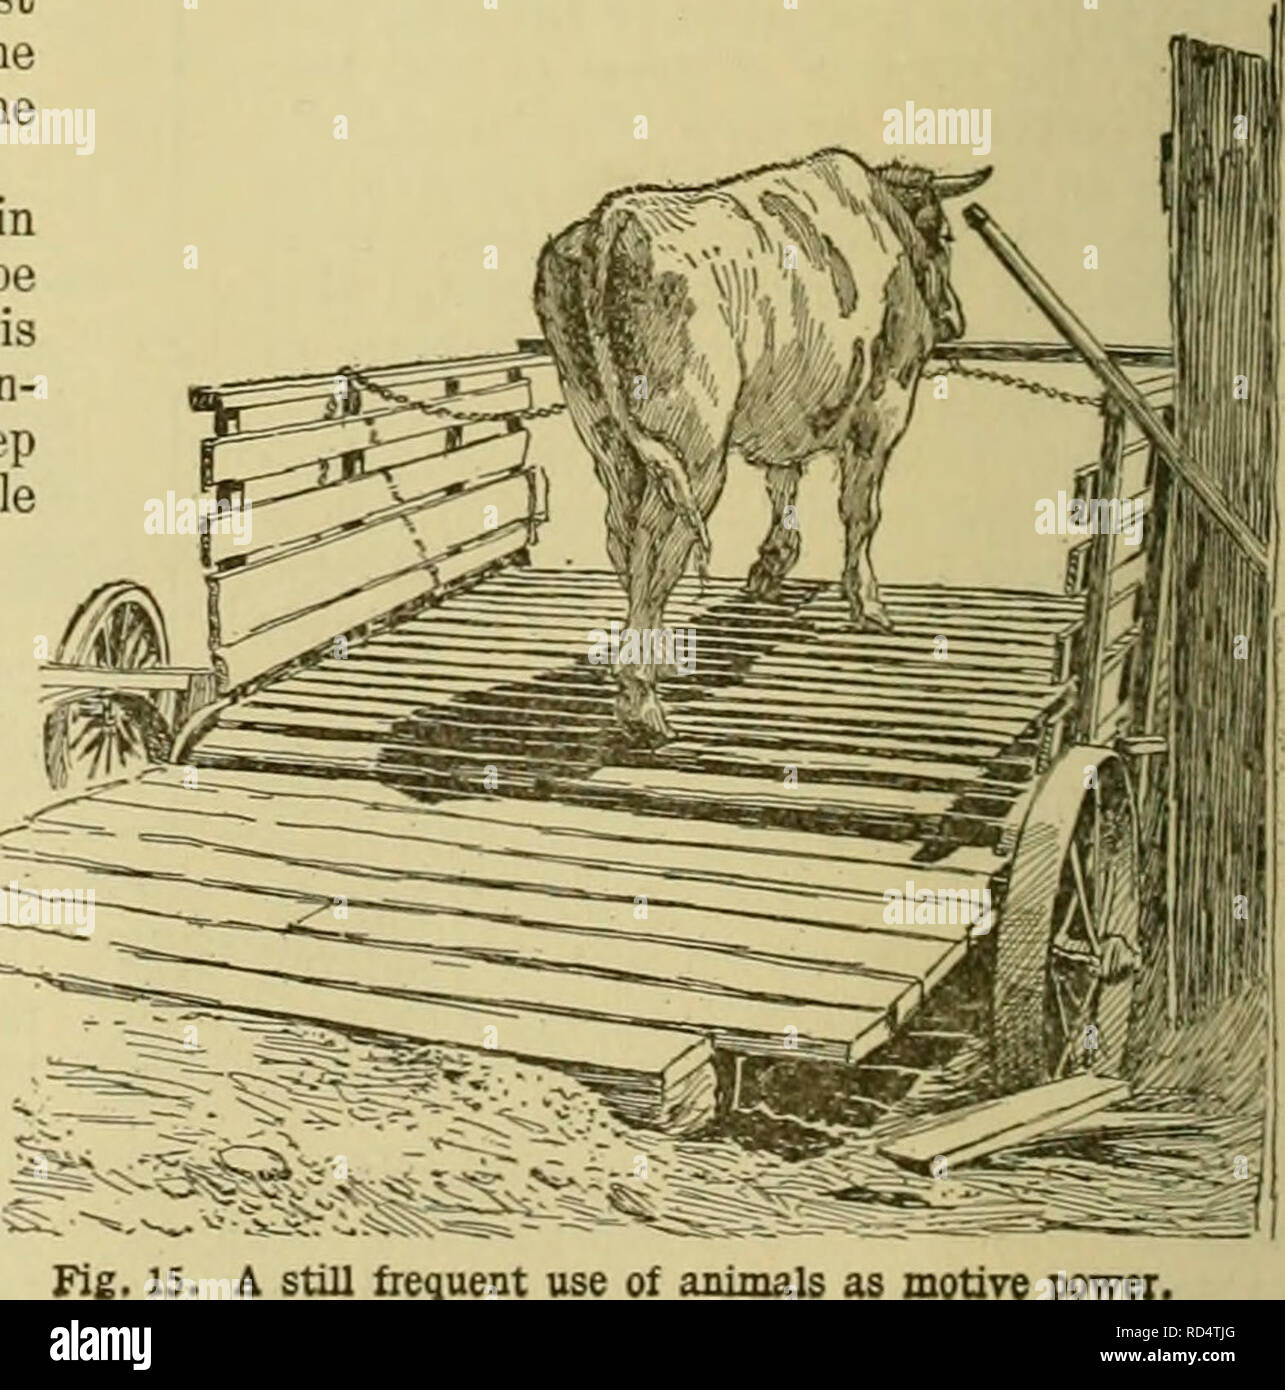 Cyclopedia of farm animals. Domestic animals; Animal products. Fig. 14. Use  of oxen in haying. (7) Animals enable the farmer to make a more constant use  of his capital. The wheat-farmer